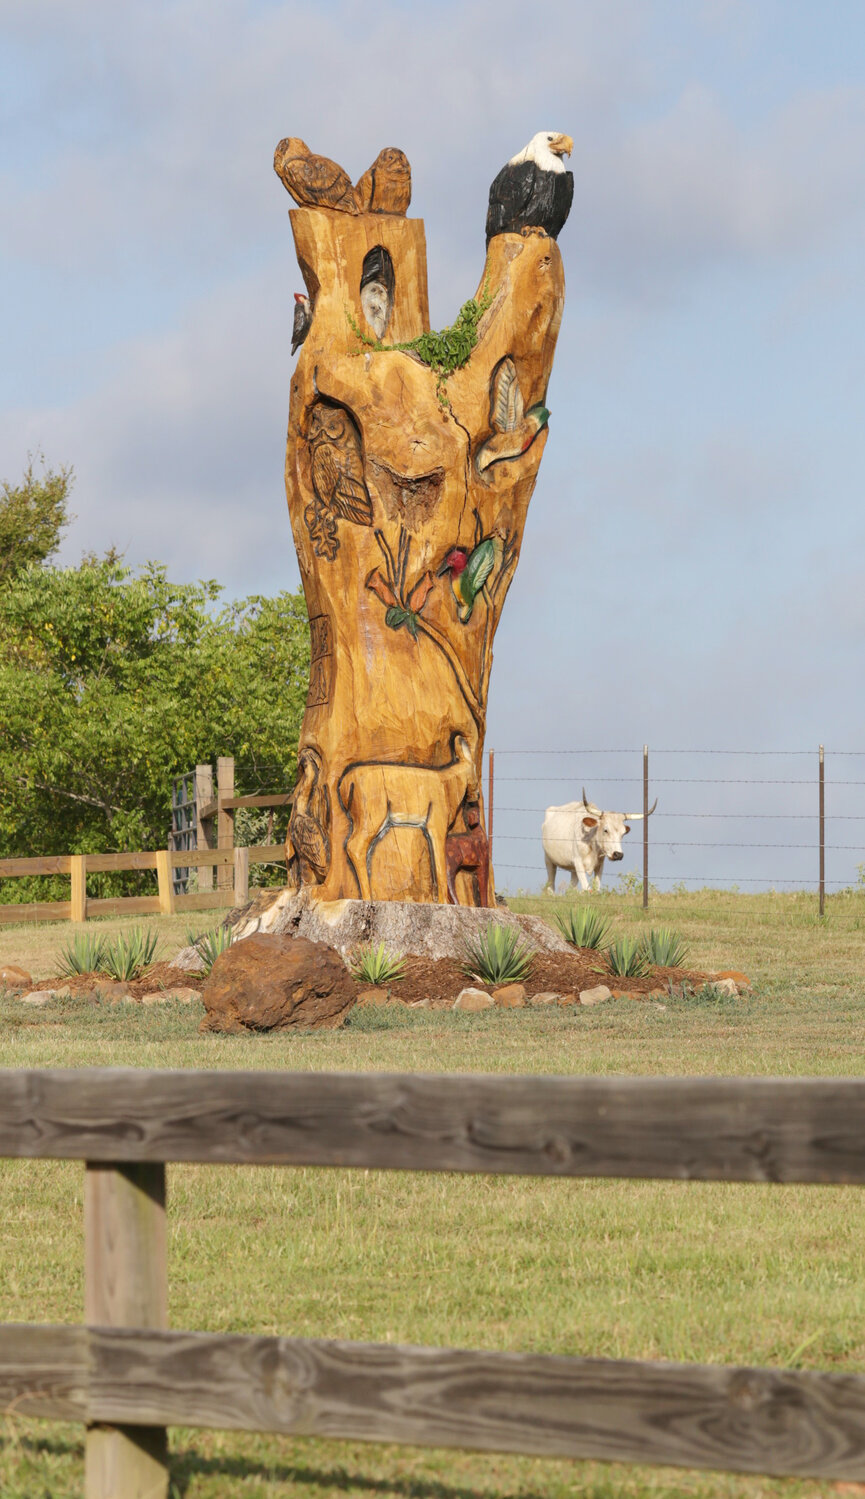 at the Mineola Nature Preserve for the chainsaw sculpture of local artist Jimmy Hobbs. It depicts a variety of native